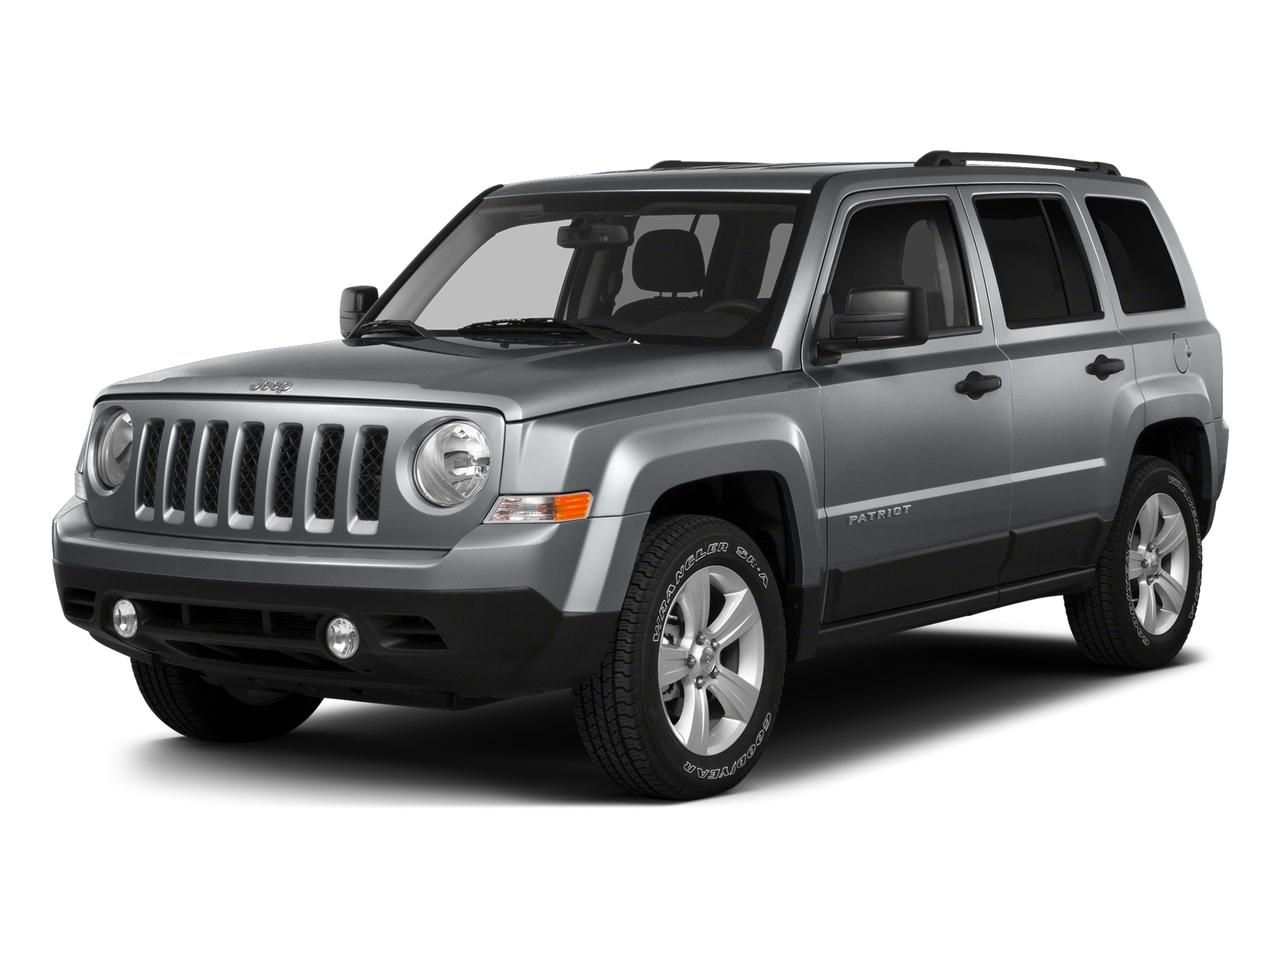 2016 Jeep Patriot Vehicle Photo in Plainfield, IL 60586